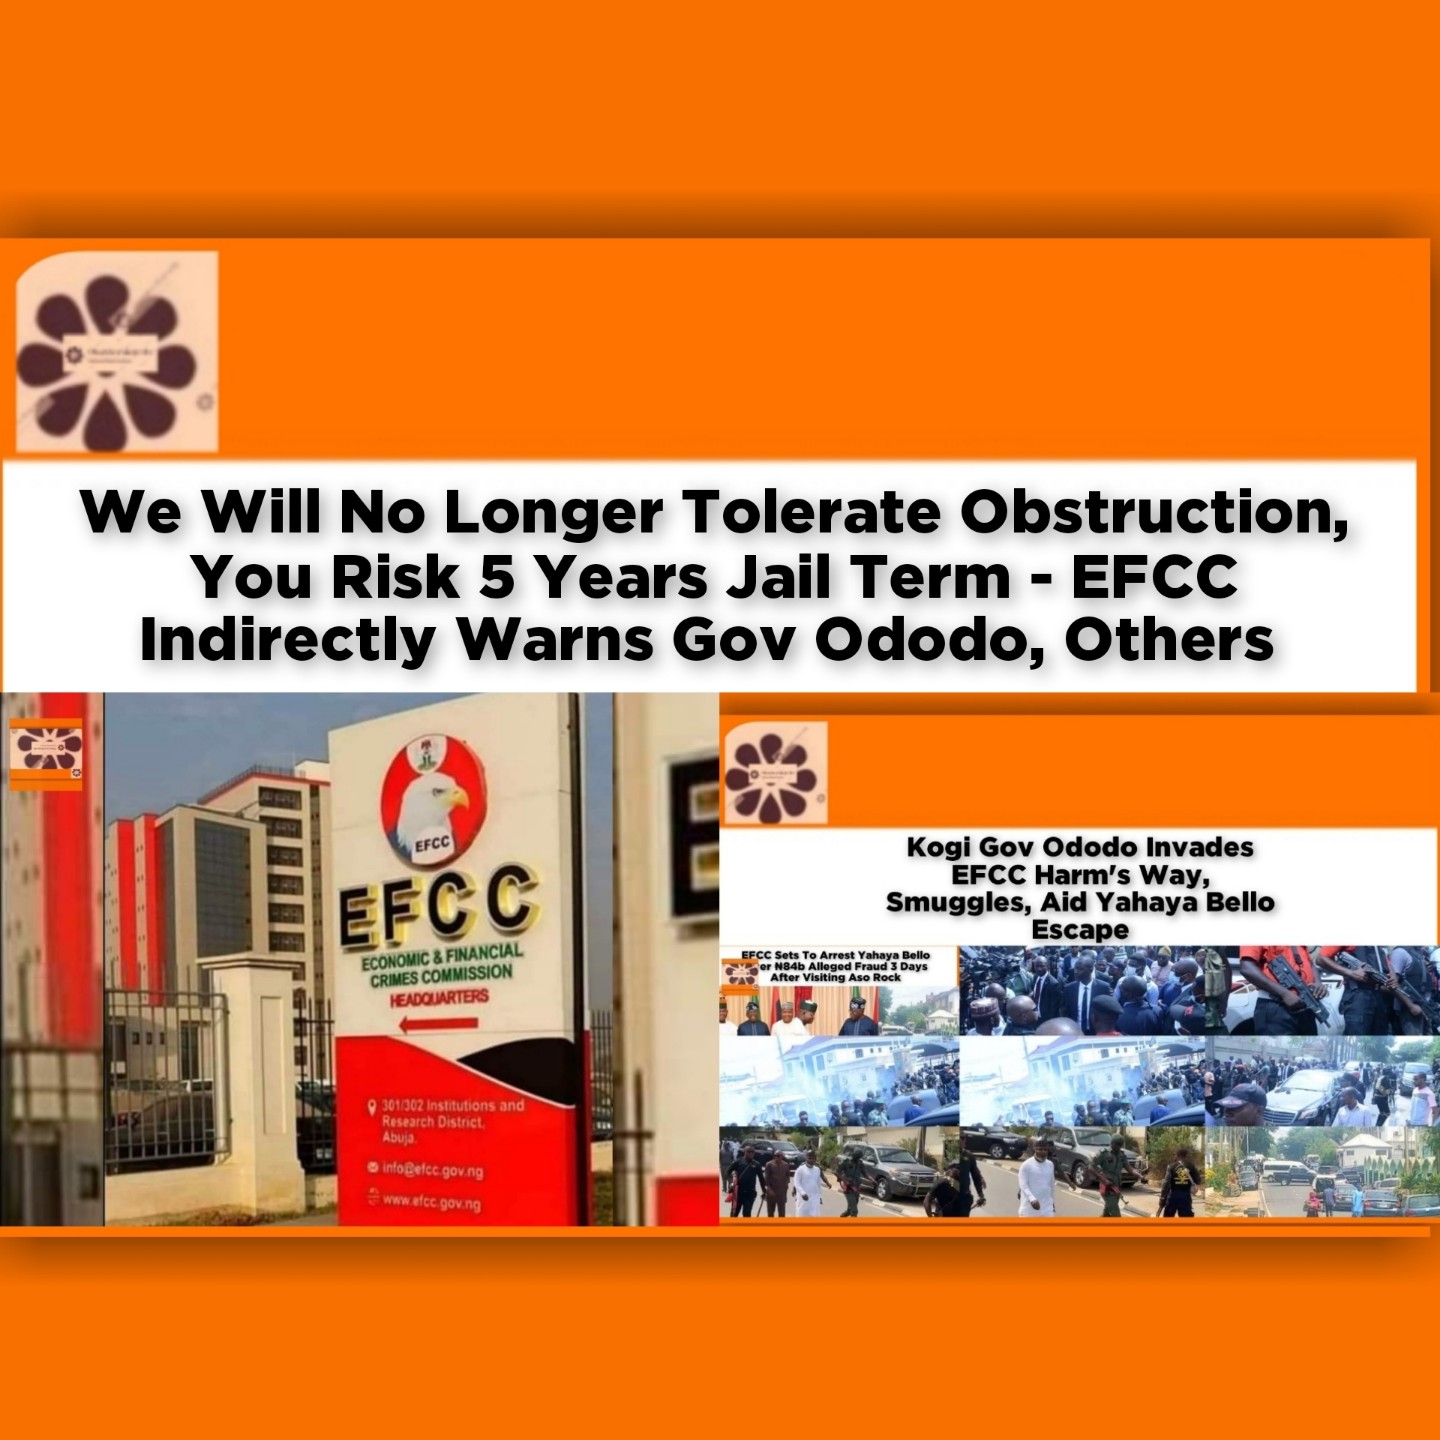 We Will No Longer Tolerate Obstruction, You Risk 5 Years Jail Term - EFCC Indirectly Warns Gov Ododo, Others ~ OsazuwaAkonedo #military